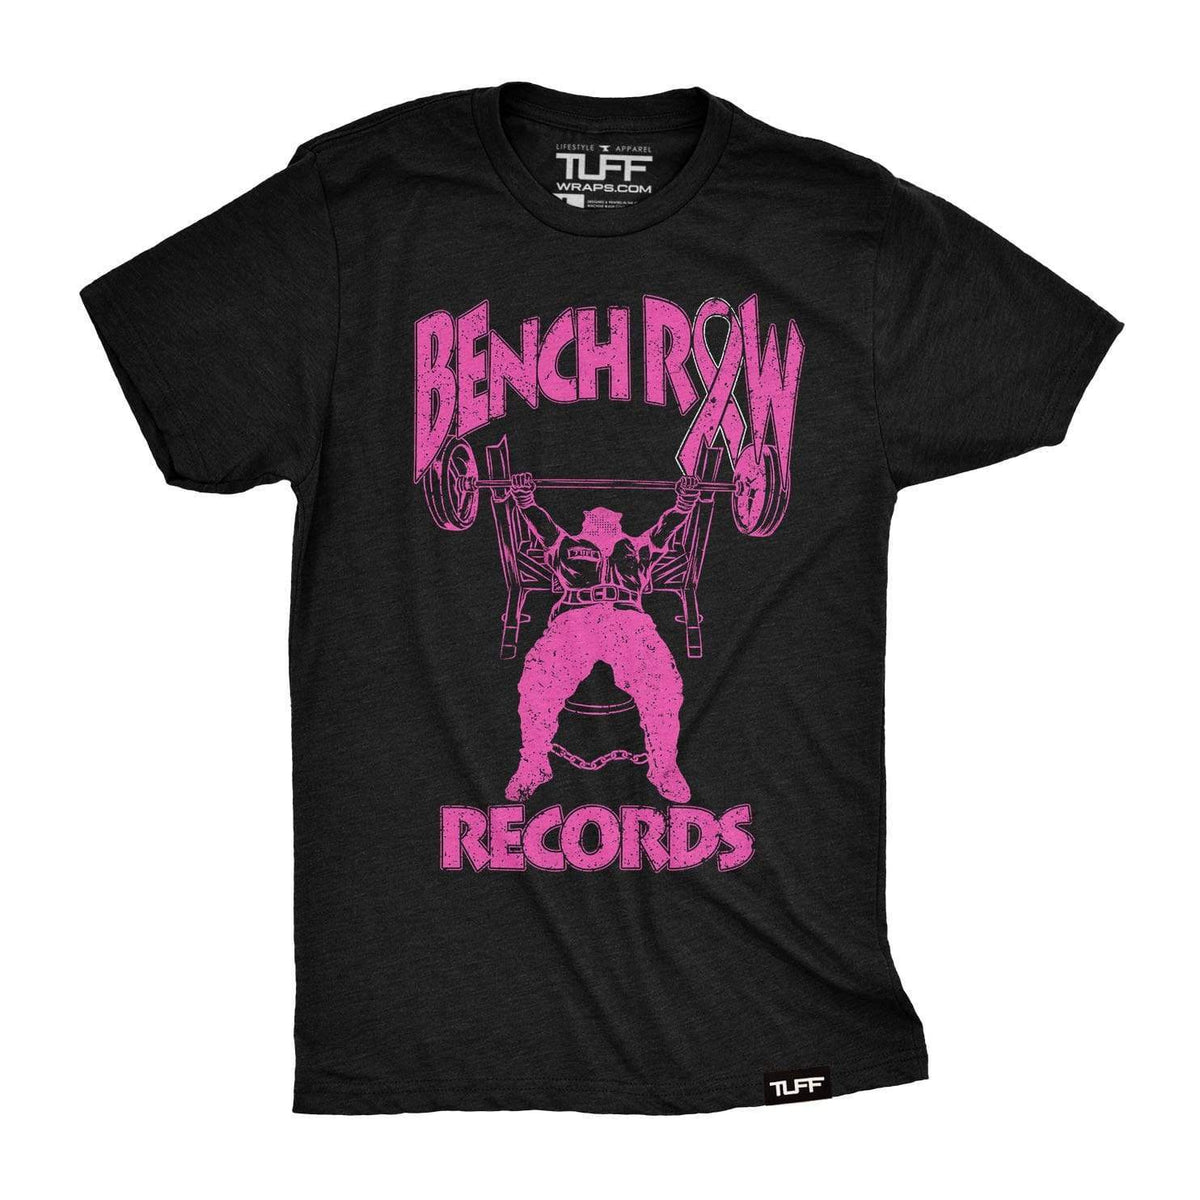 Breast Cancer Awareness Bench Row Records Tee S / Black TuffWraps.com